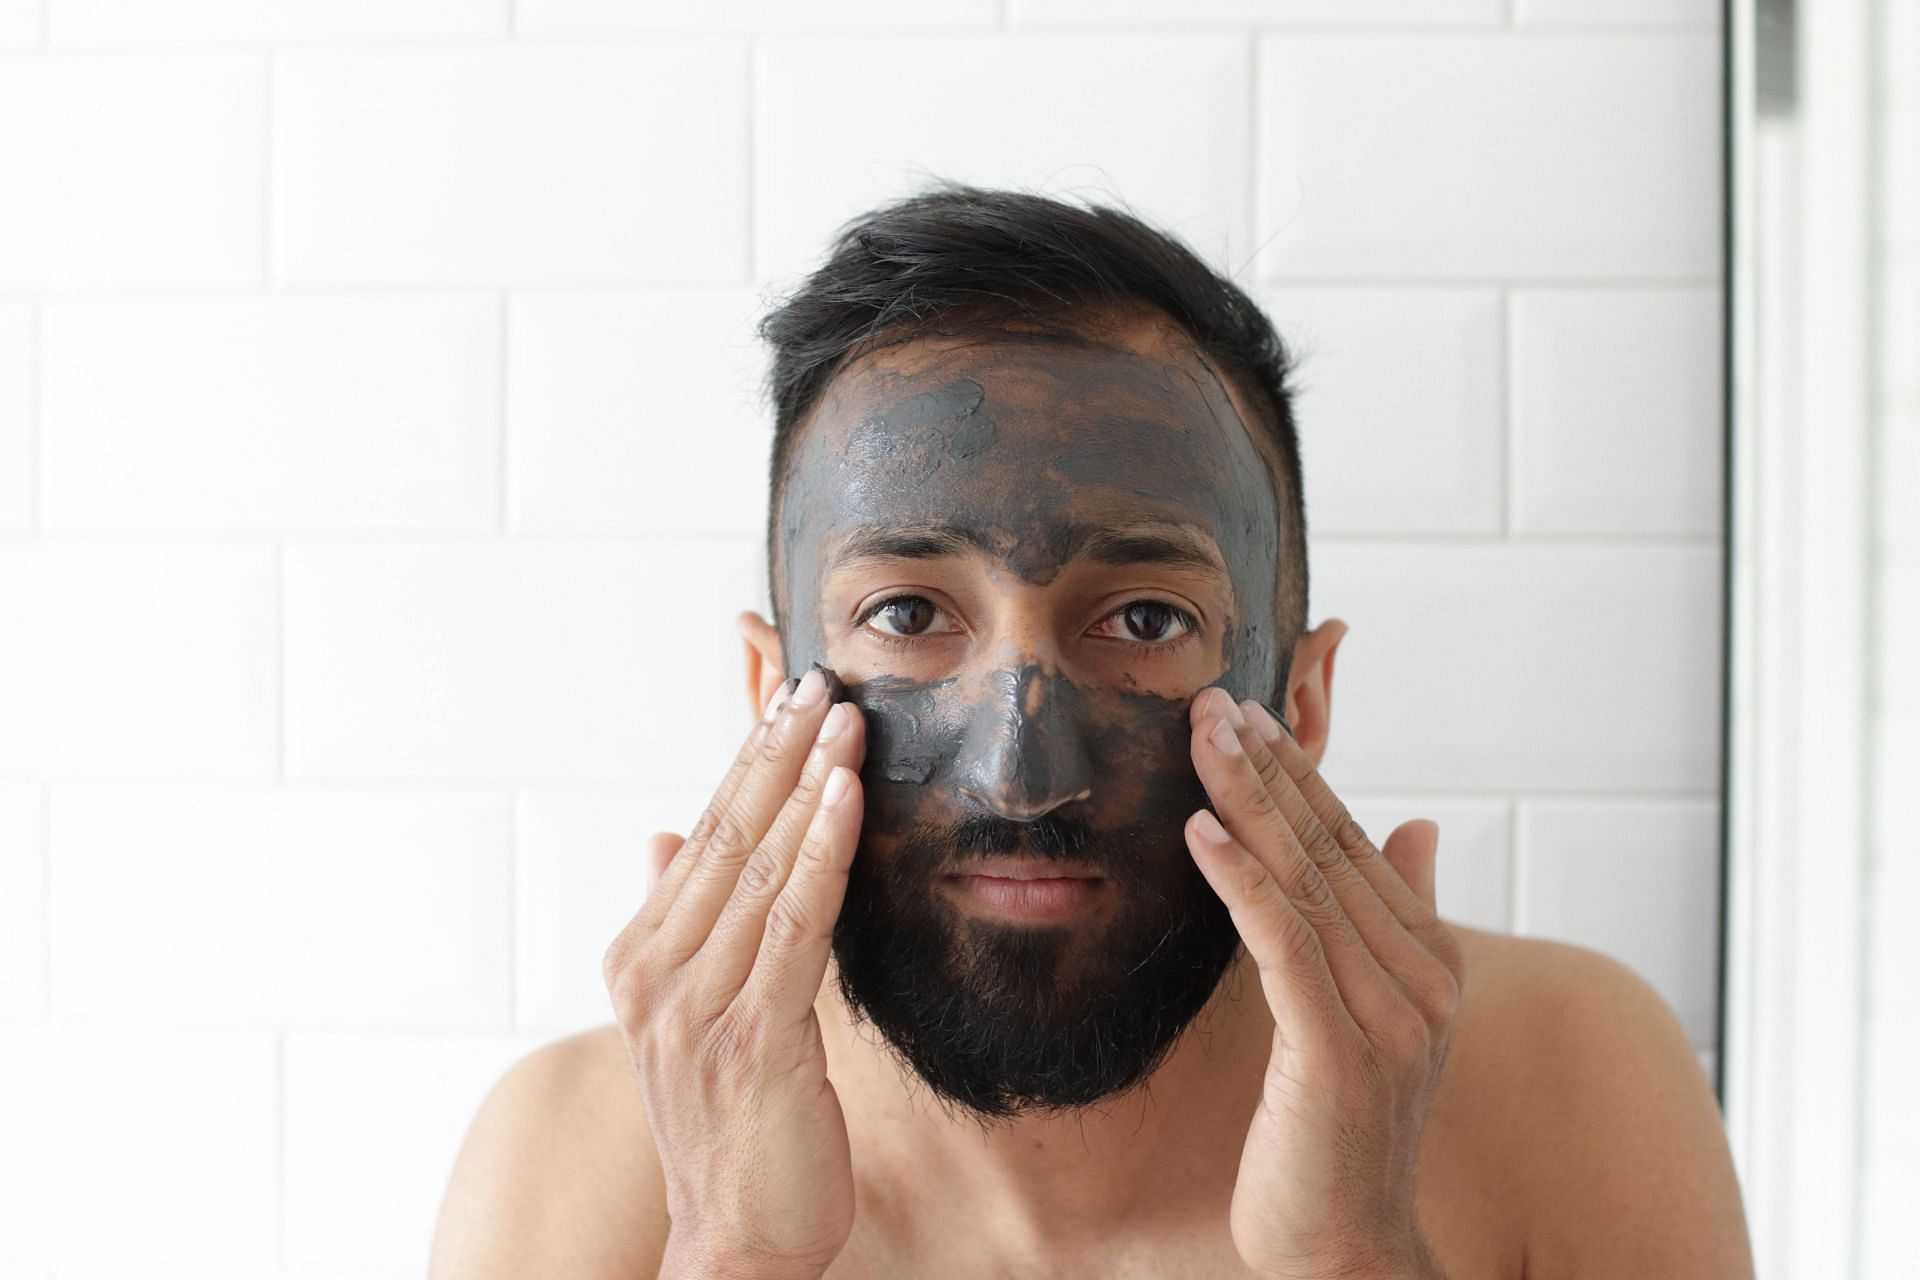 Skin care for men has been simple (Photo by Safia Shakil on Unsplash)